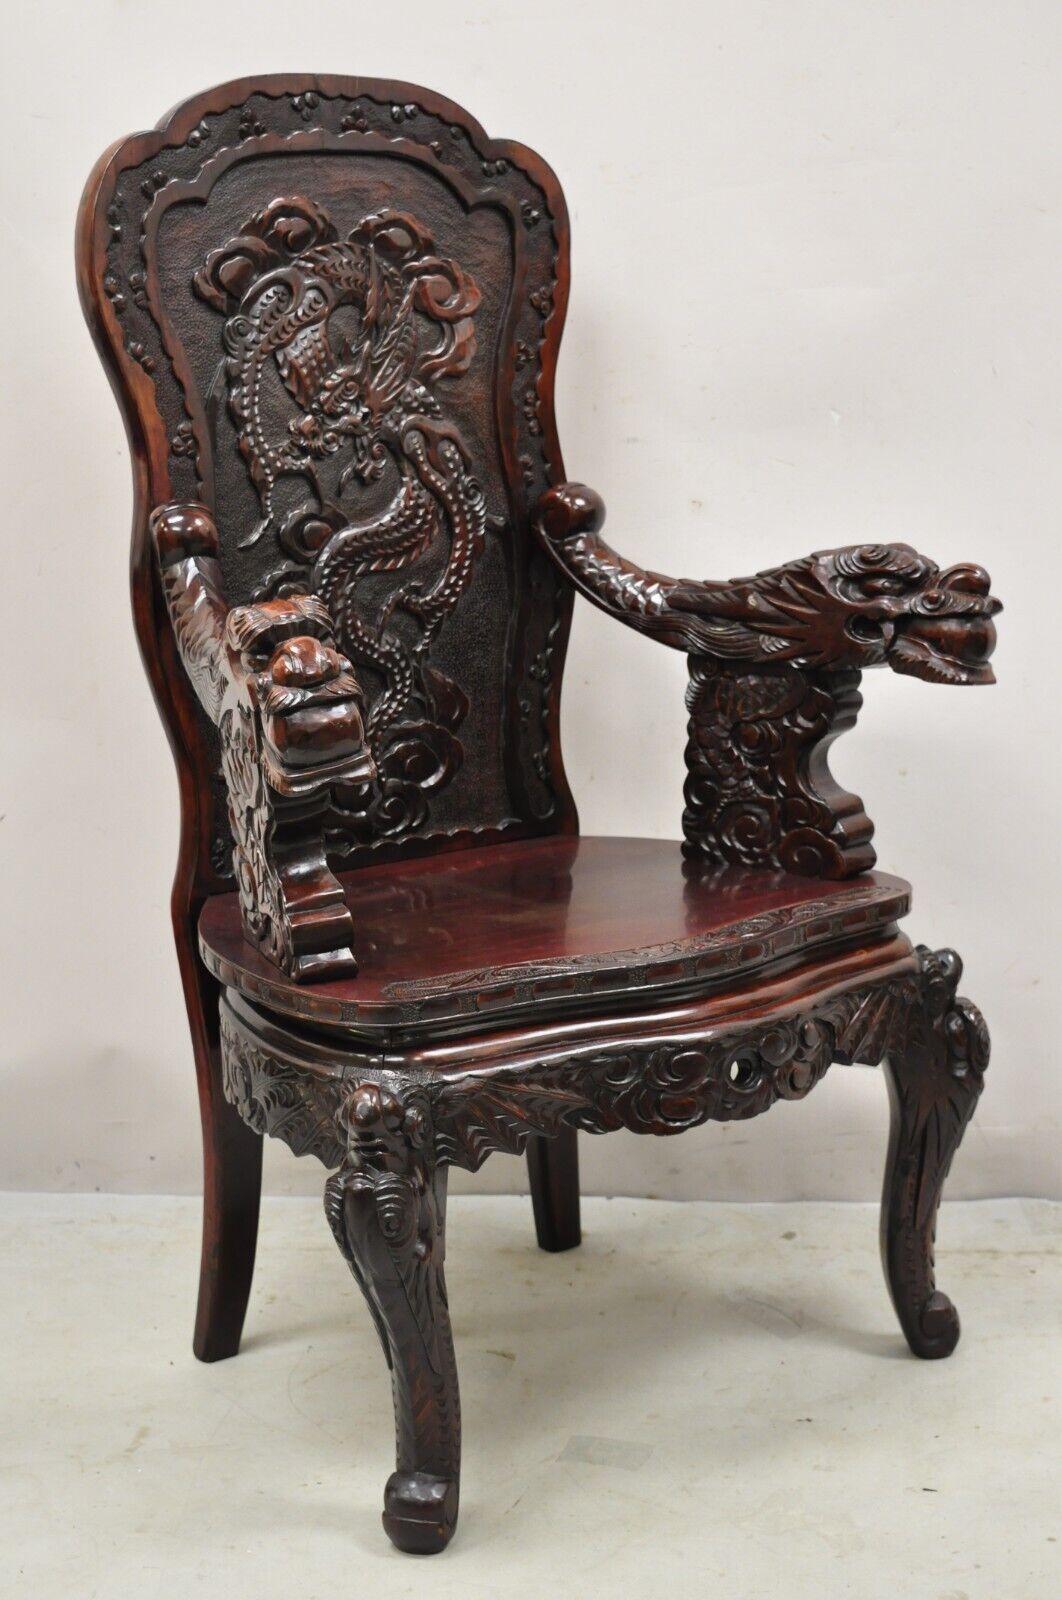 Antique Japanese Export carved hardwood foo dog throne armchair. Item features carved Foo Dog arms, solid wood construction, beautiful wood grain, nicely carved details, very nice vintage item, great style and form. circa early to Mid-20th Century